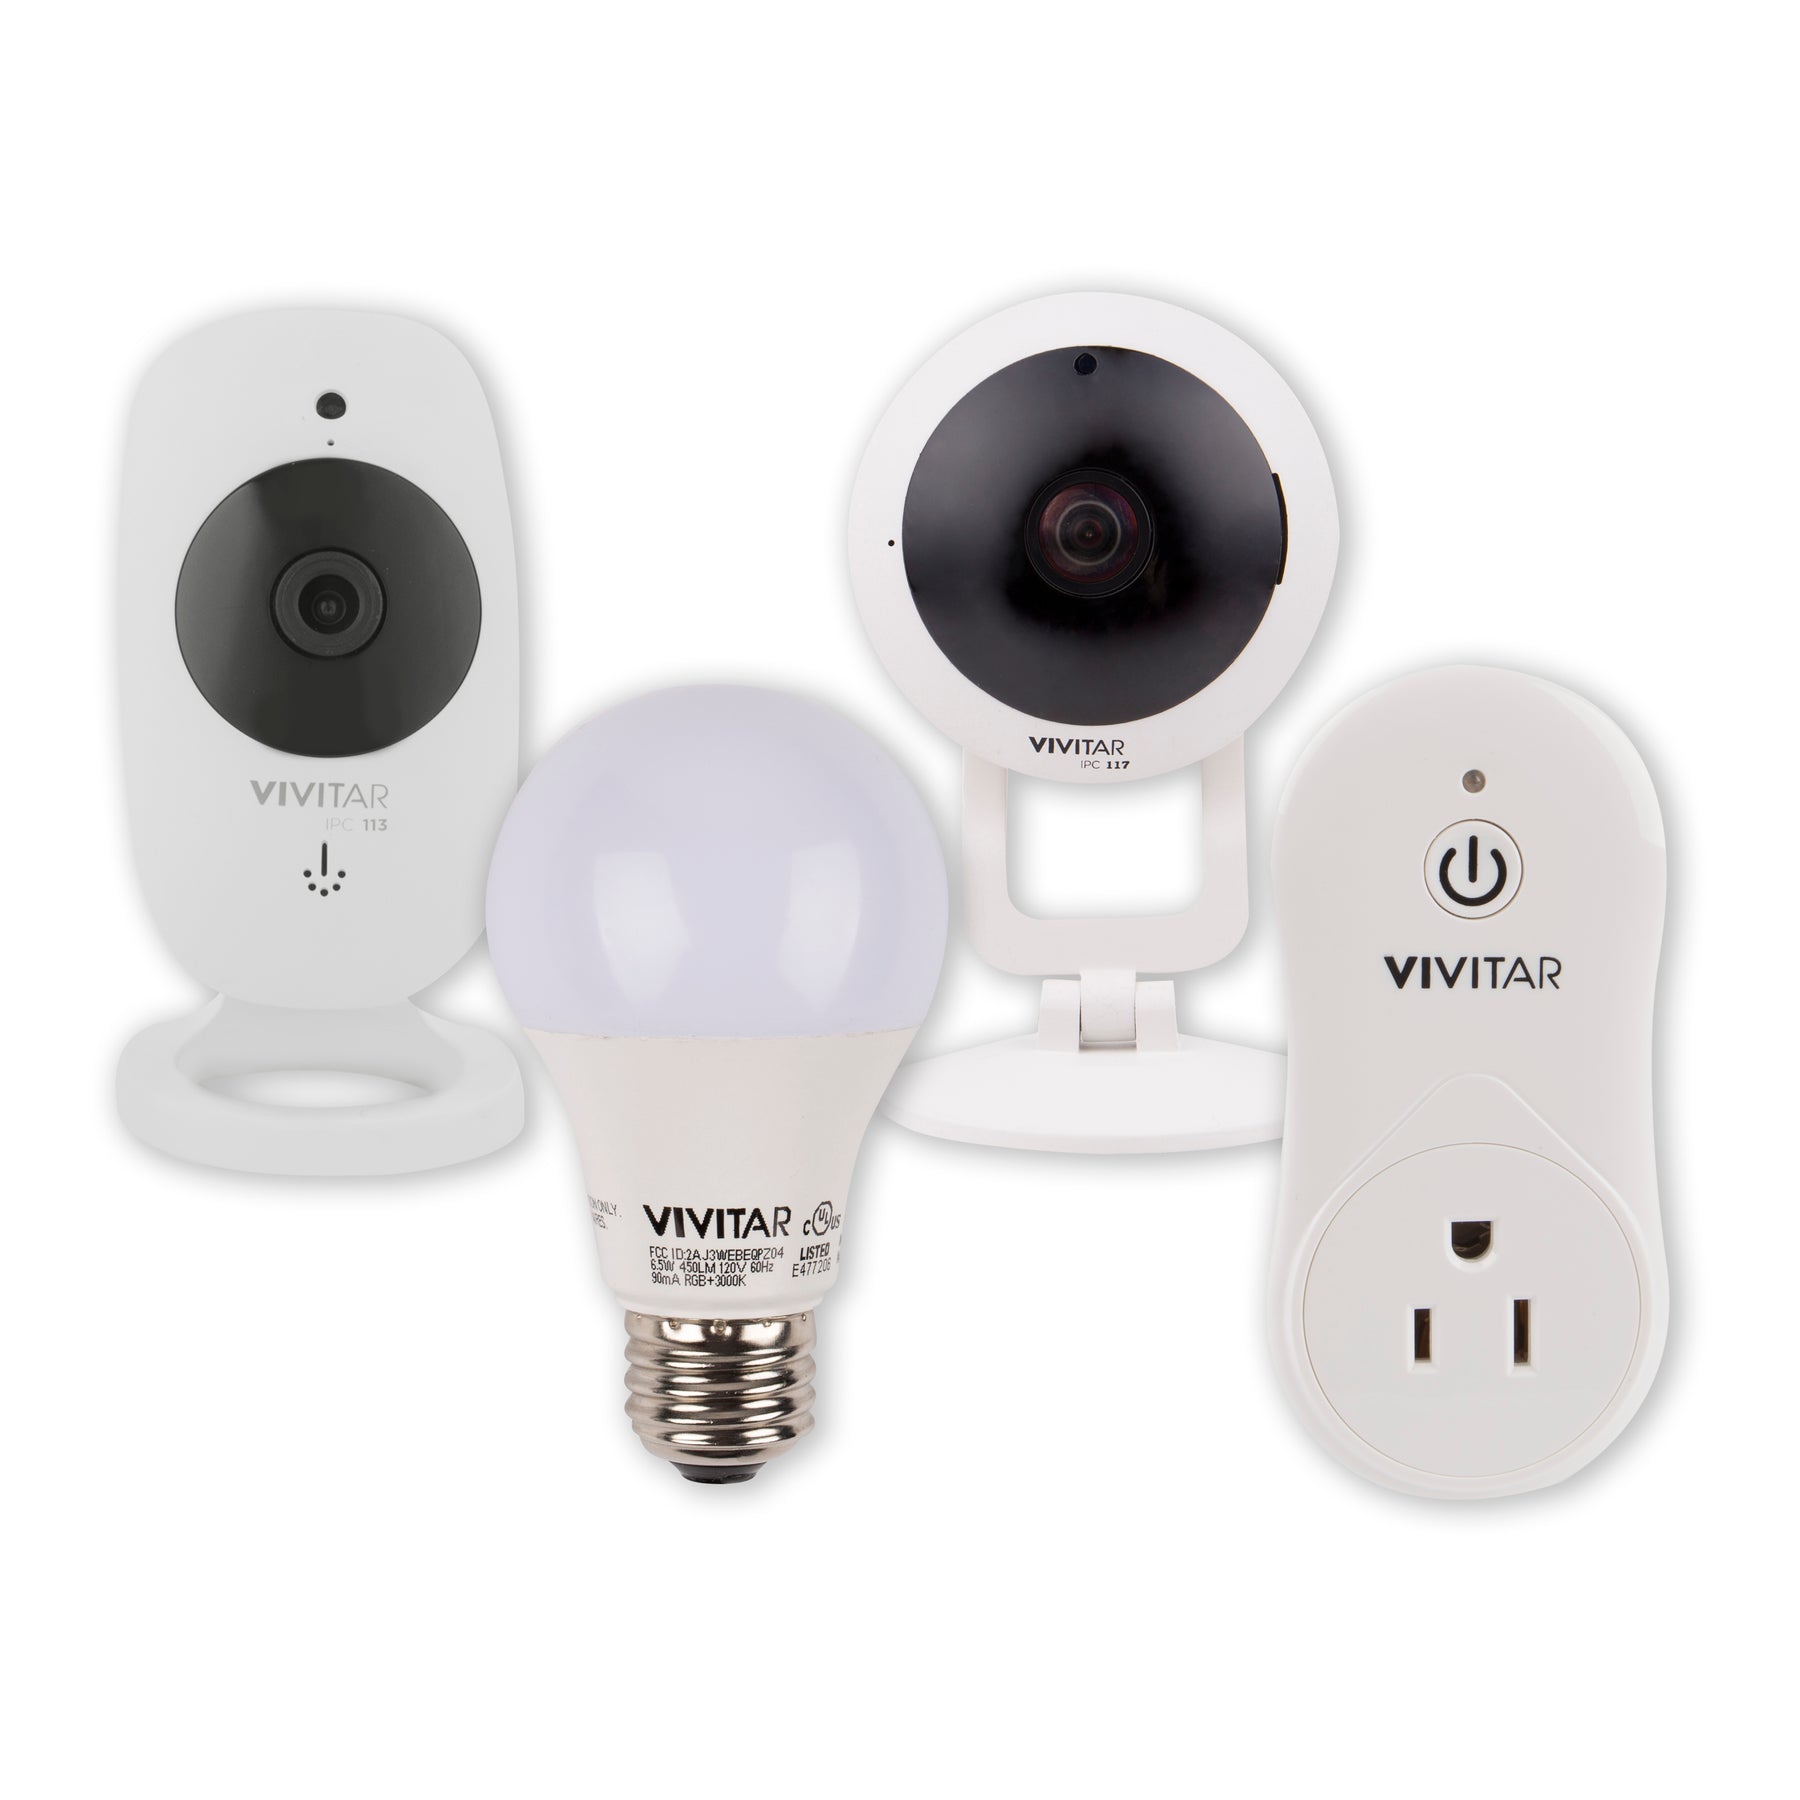 Vivitar Smart Home Line Up Launches